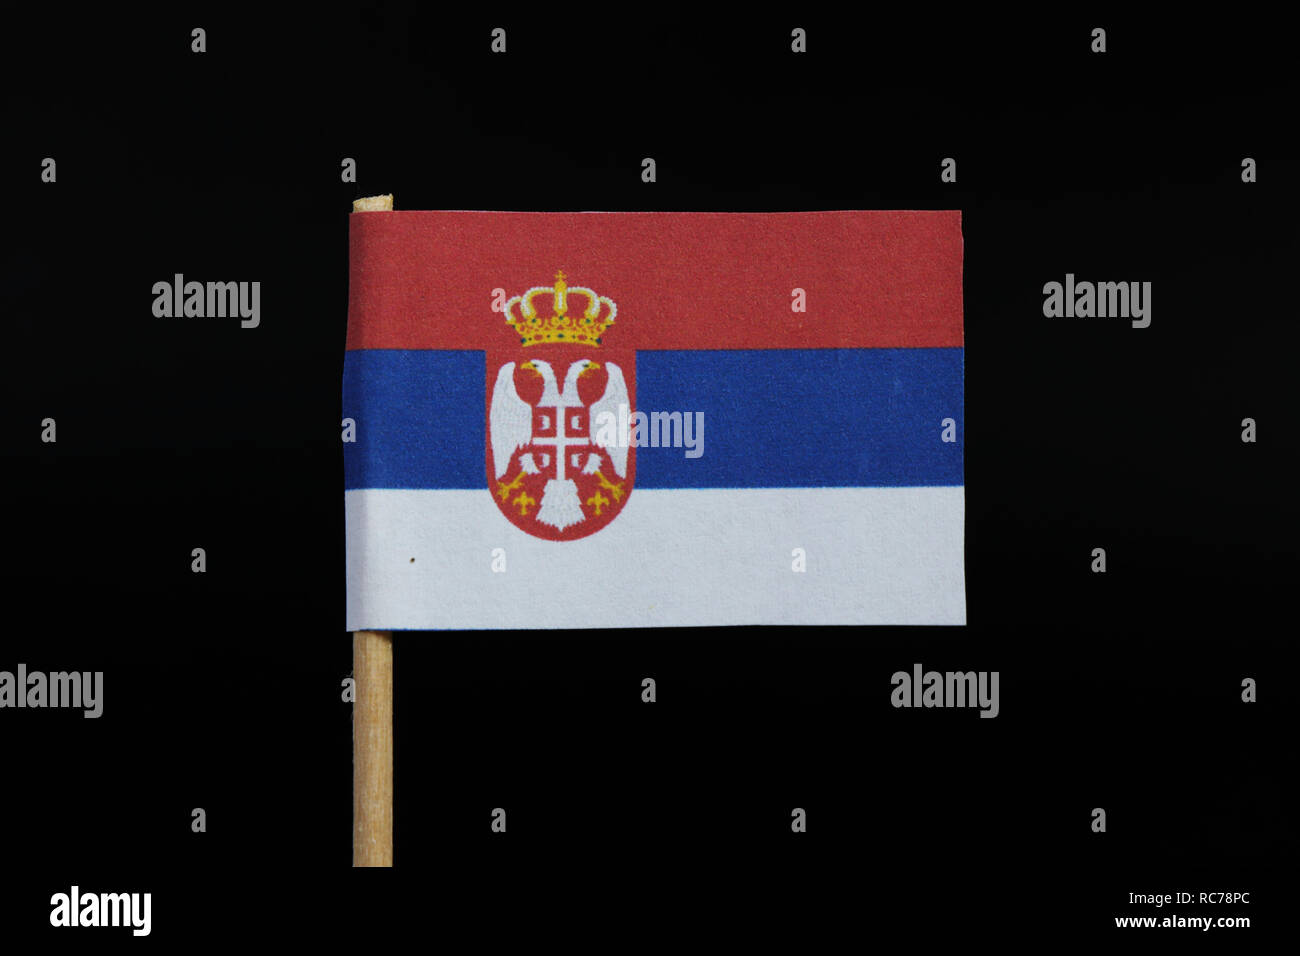 A national flag of Serbia on toothpick on black background. A horizontal tricolor of red, blue, and white with coat of arms. Stock Photo